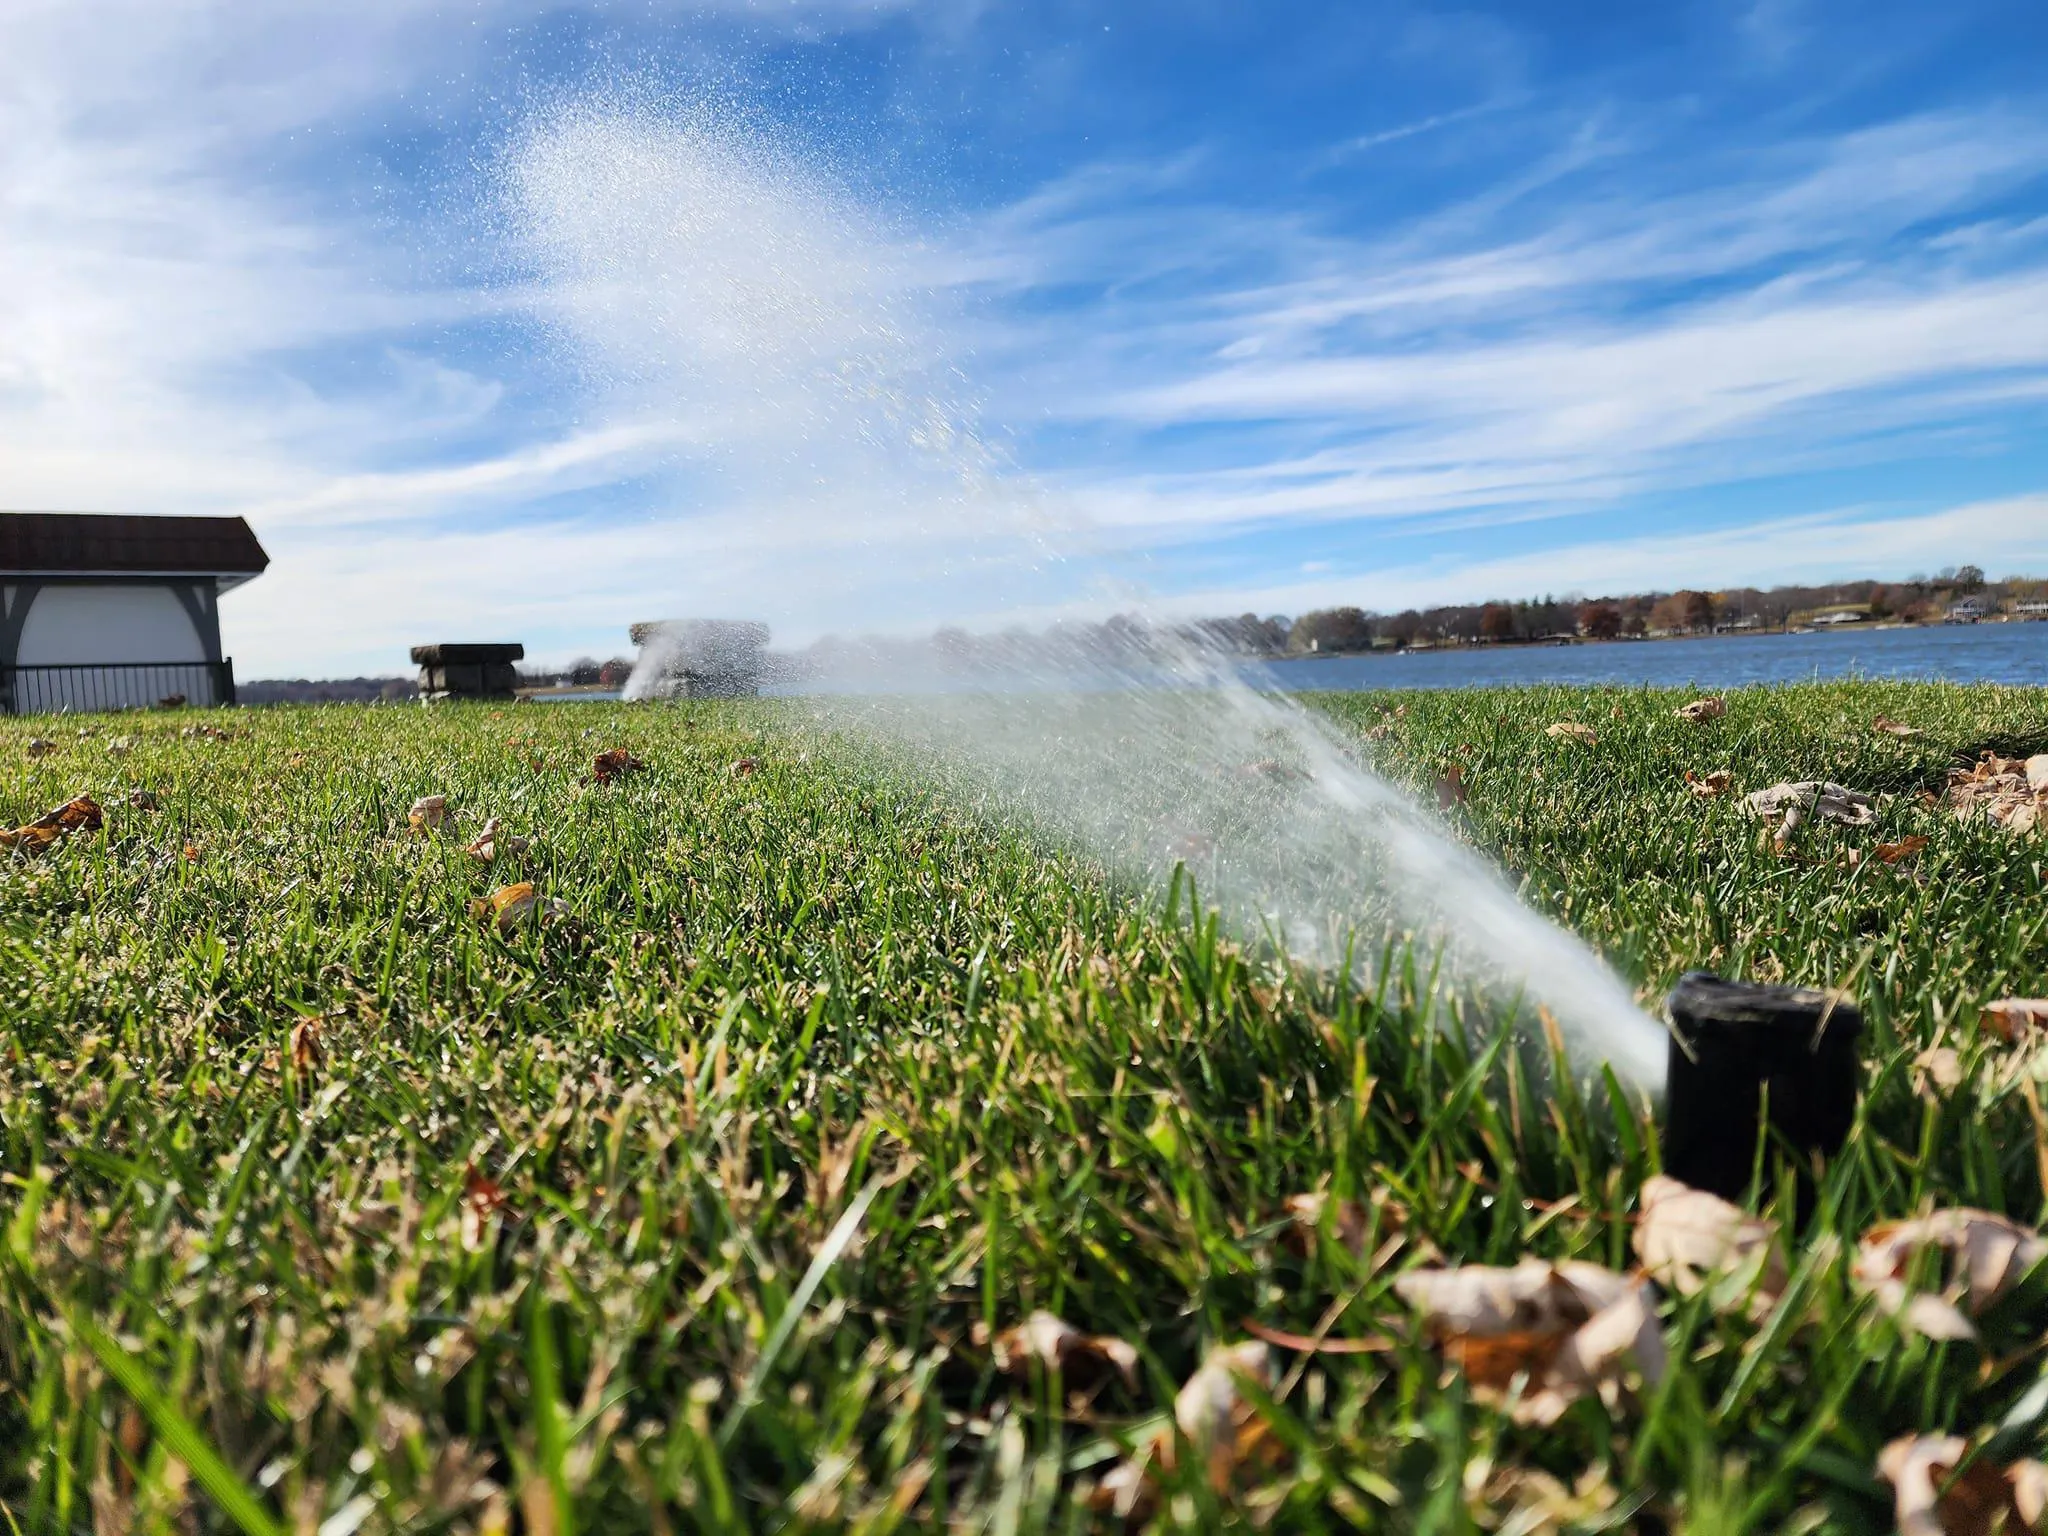 Lawn Care for Viking Dirtworks and Landscaping in Gallatin, MO